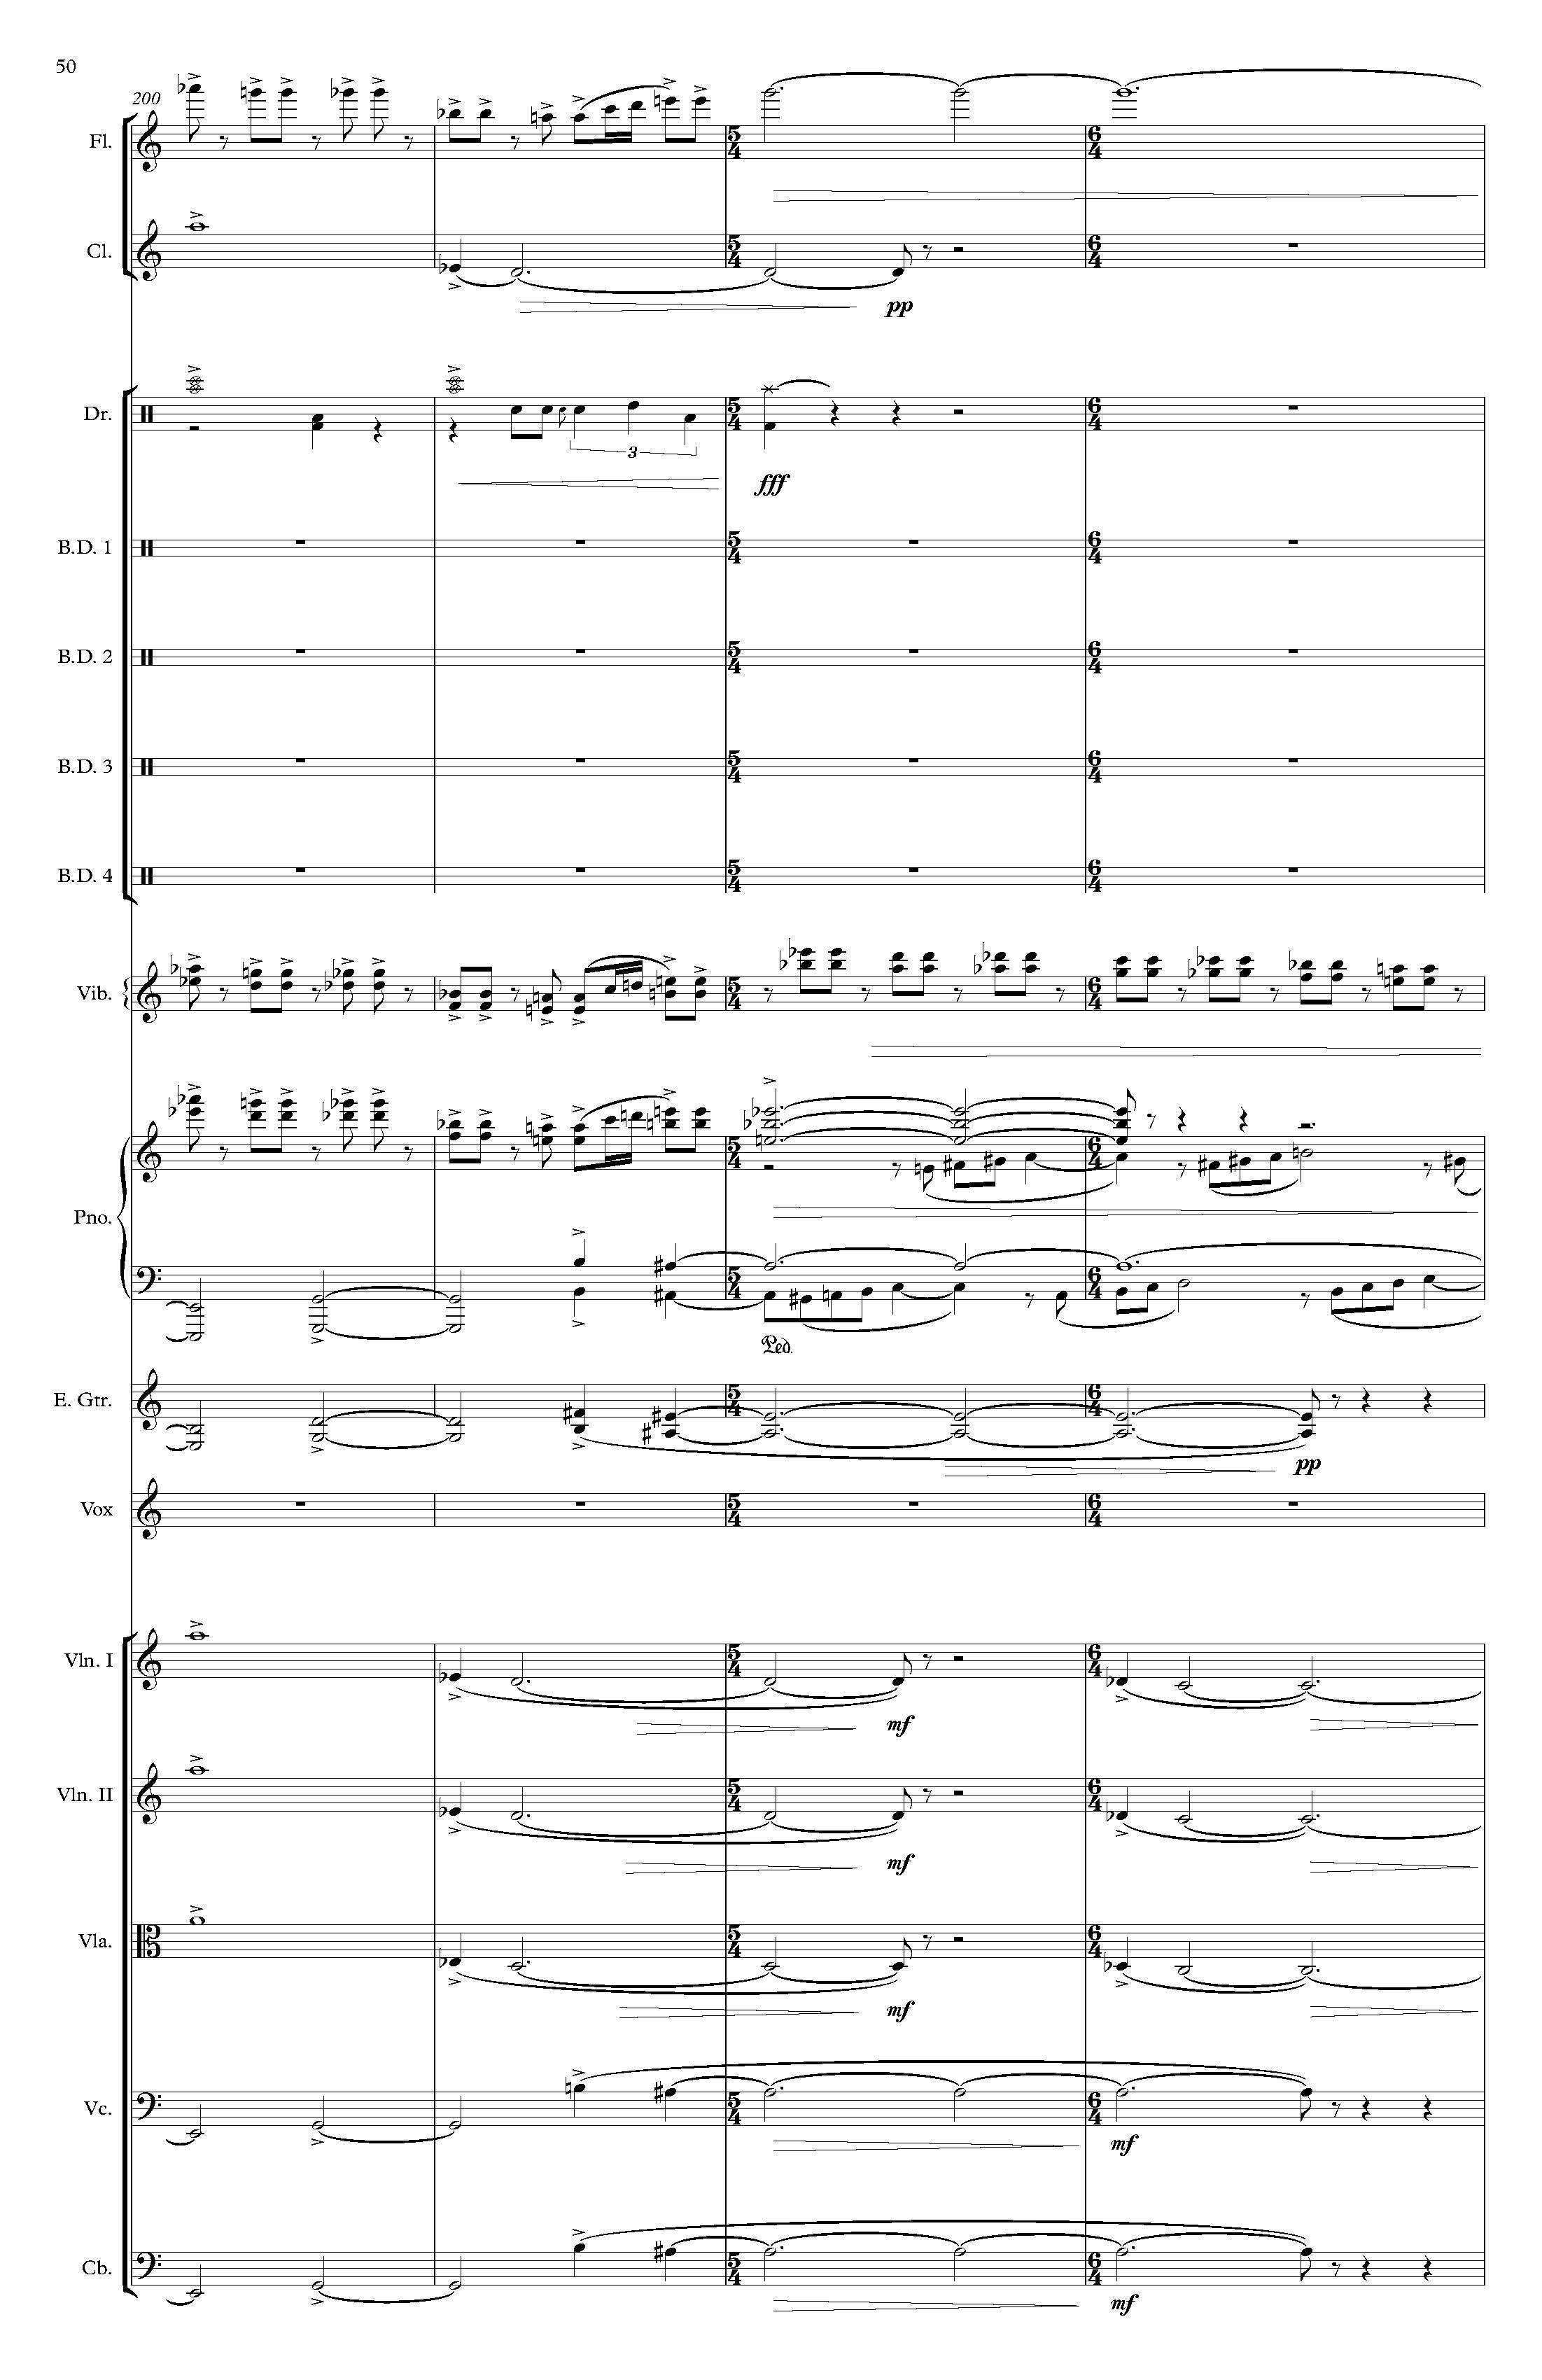 The Rembrandt of Avenue A - Complete Score_Page_56.jpg